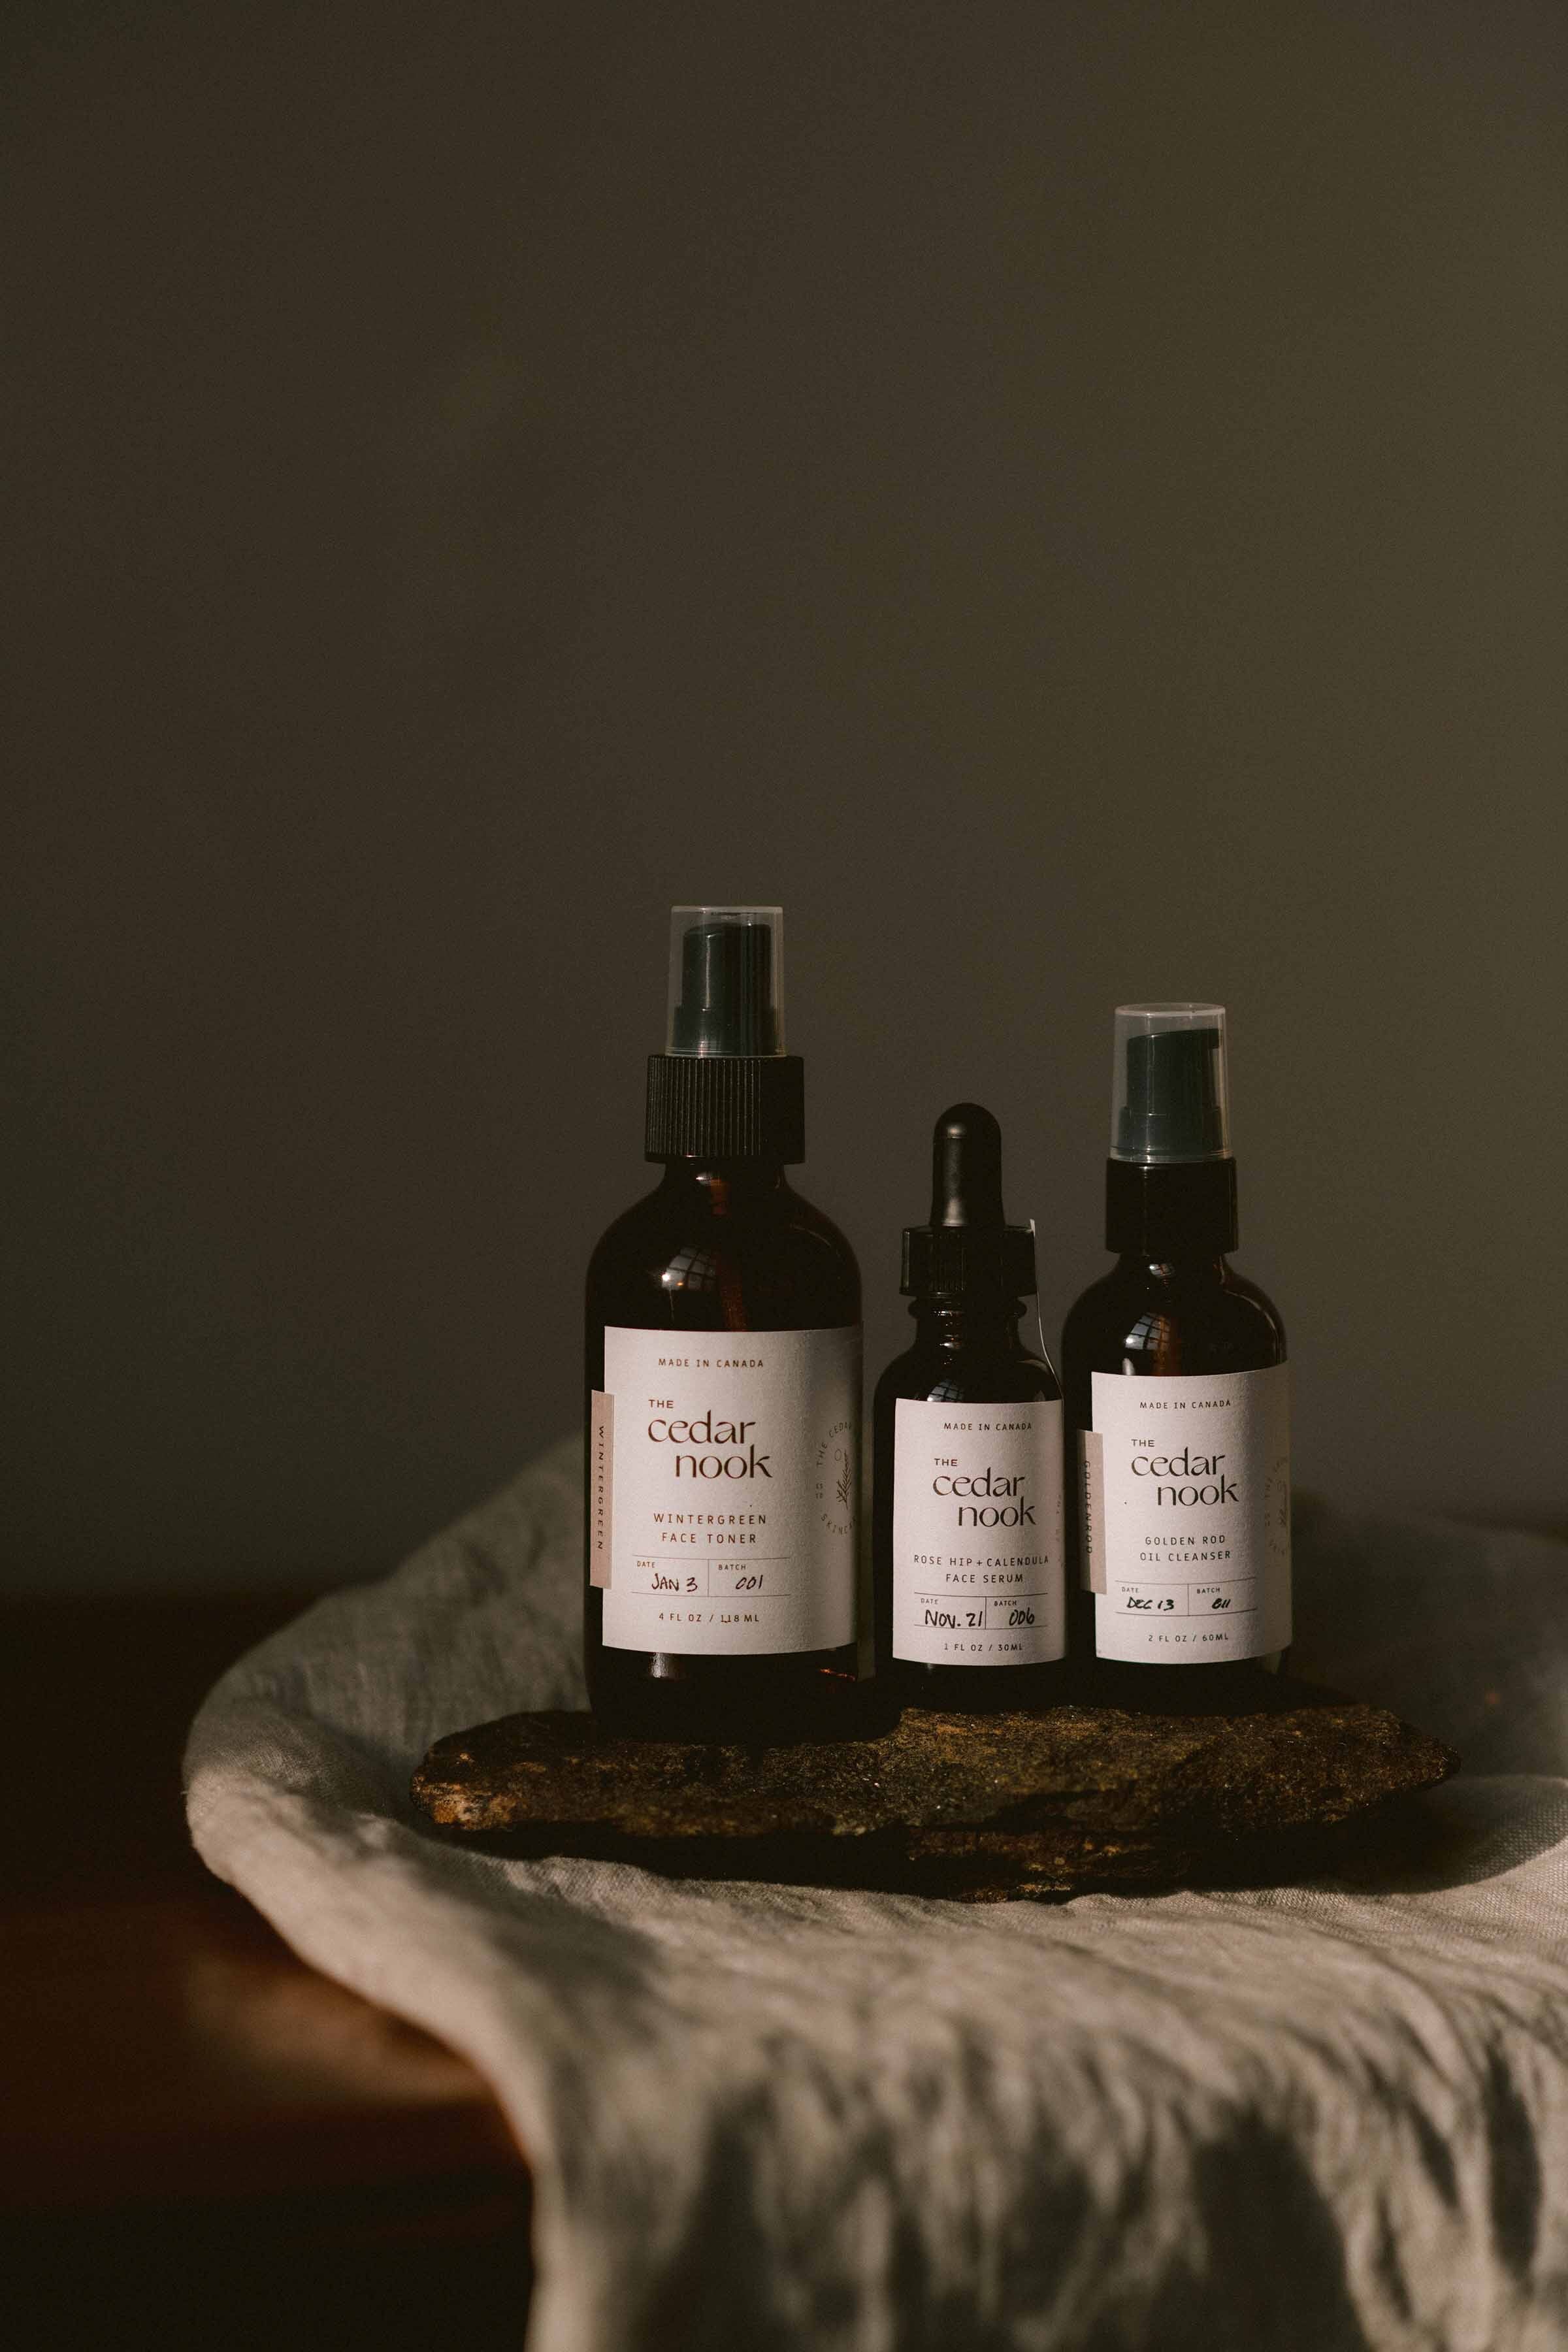 The Cedar Nook Wintergreen Face Toner with Rose Hip and Calendula Face Serum and Goldenrod Oil Cleanser. The three bottles are sitting aesthetically on a rock on a wooden table with some grey linen.